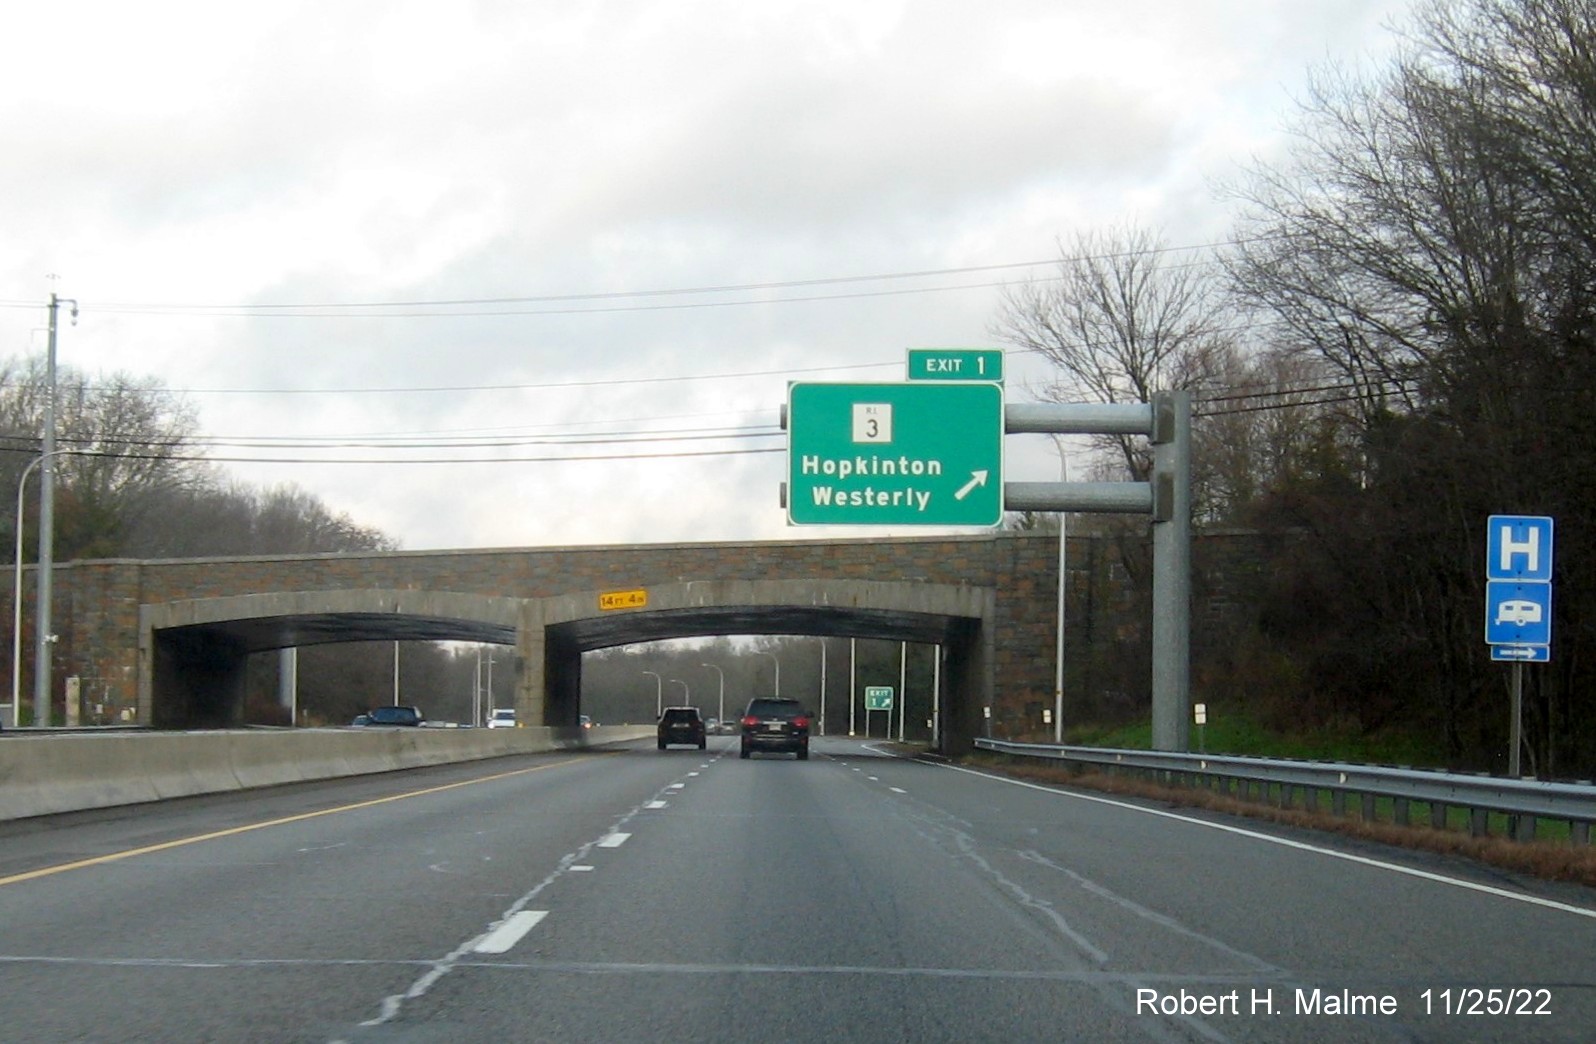 Image of overhead ramp sign for RI 3 Westerly exit with unchanged exit number on I-95 North, November 2022